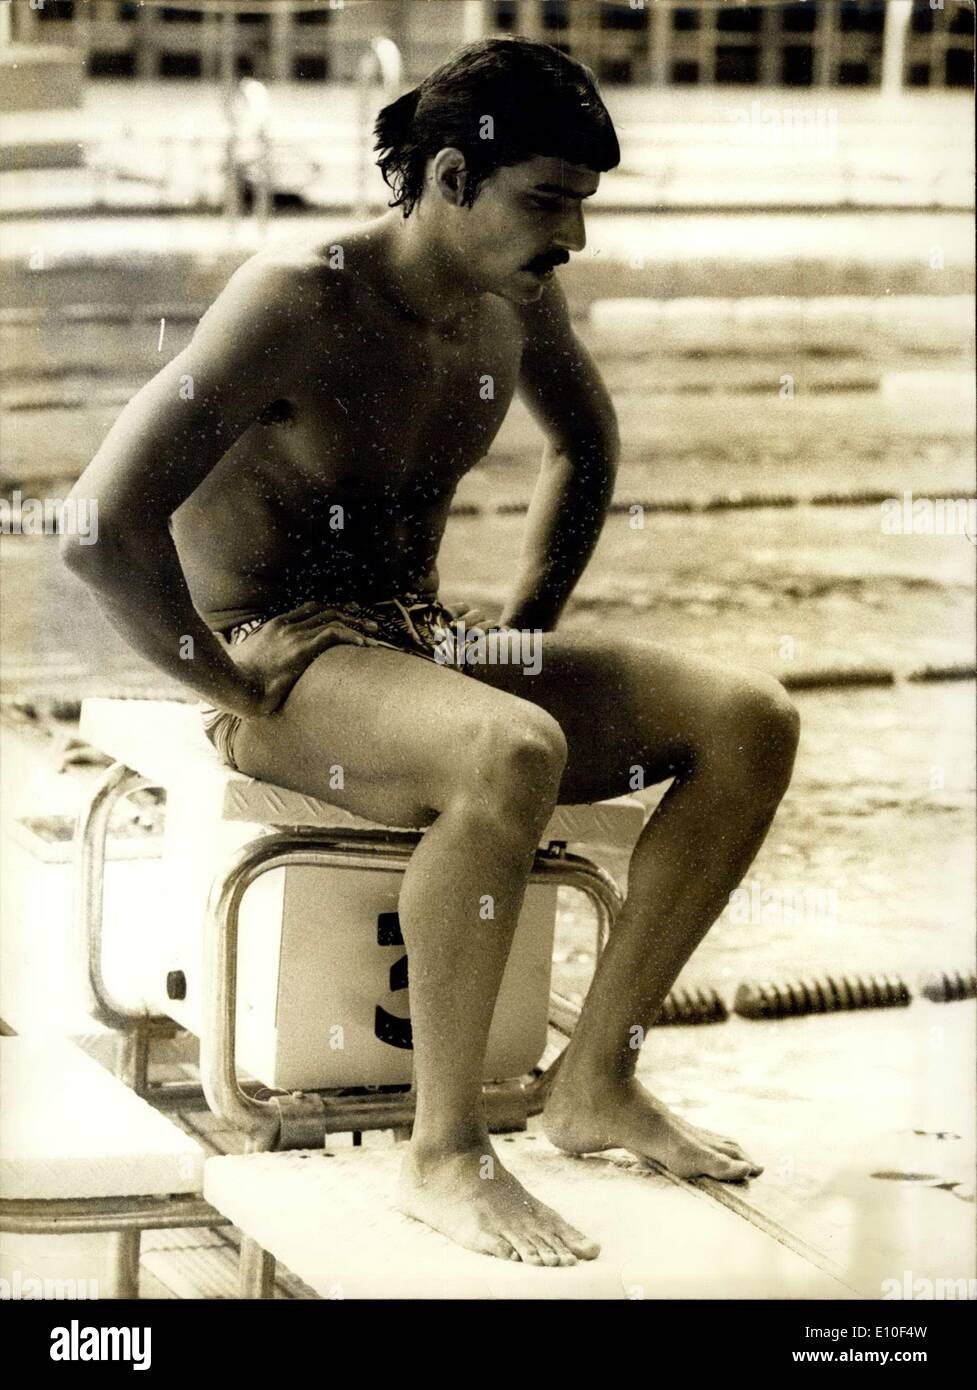 Sep. 01, 1972 - Study Of A Champion: Reminiscent of Rodin's statue of The Thinker - Mark Spitz, the American swimmer, in a thoughtful mood after winning his 5th Gold Medal at the Olympic Games in Munich. Stock Photo